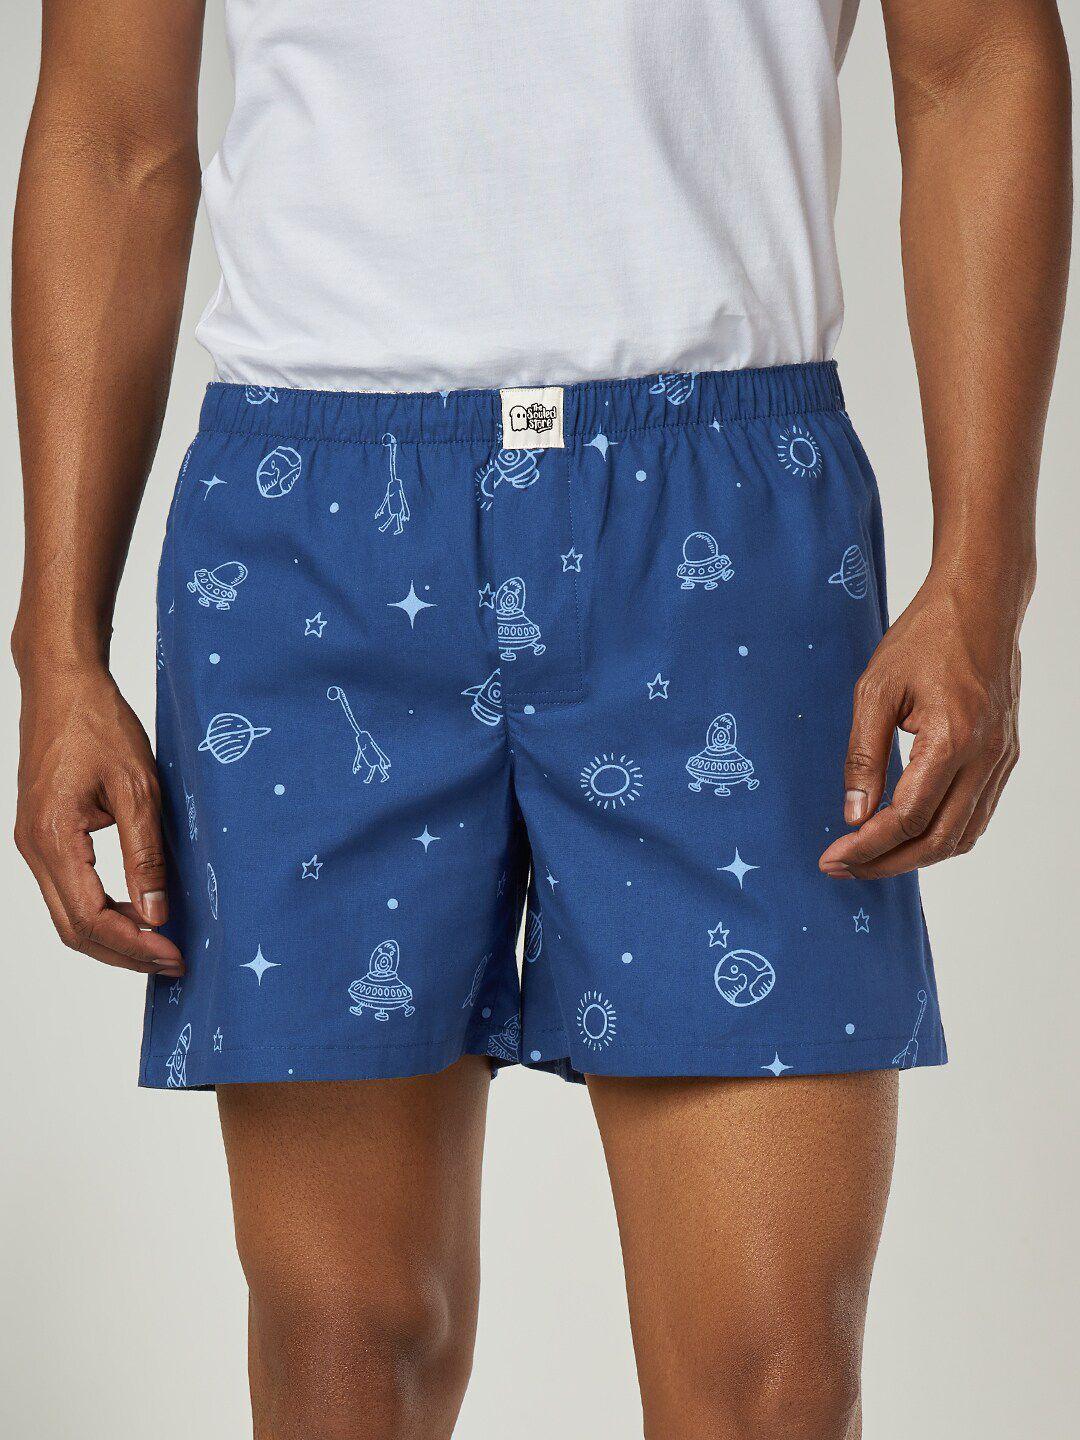 the souled store men blue printed boxers